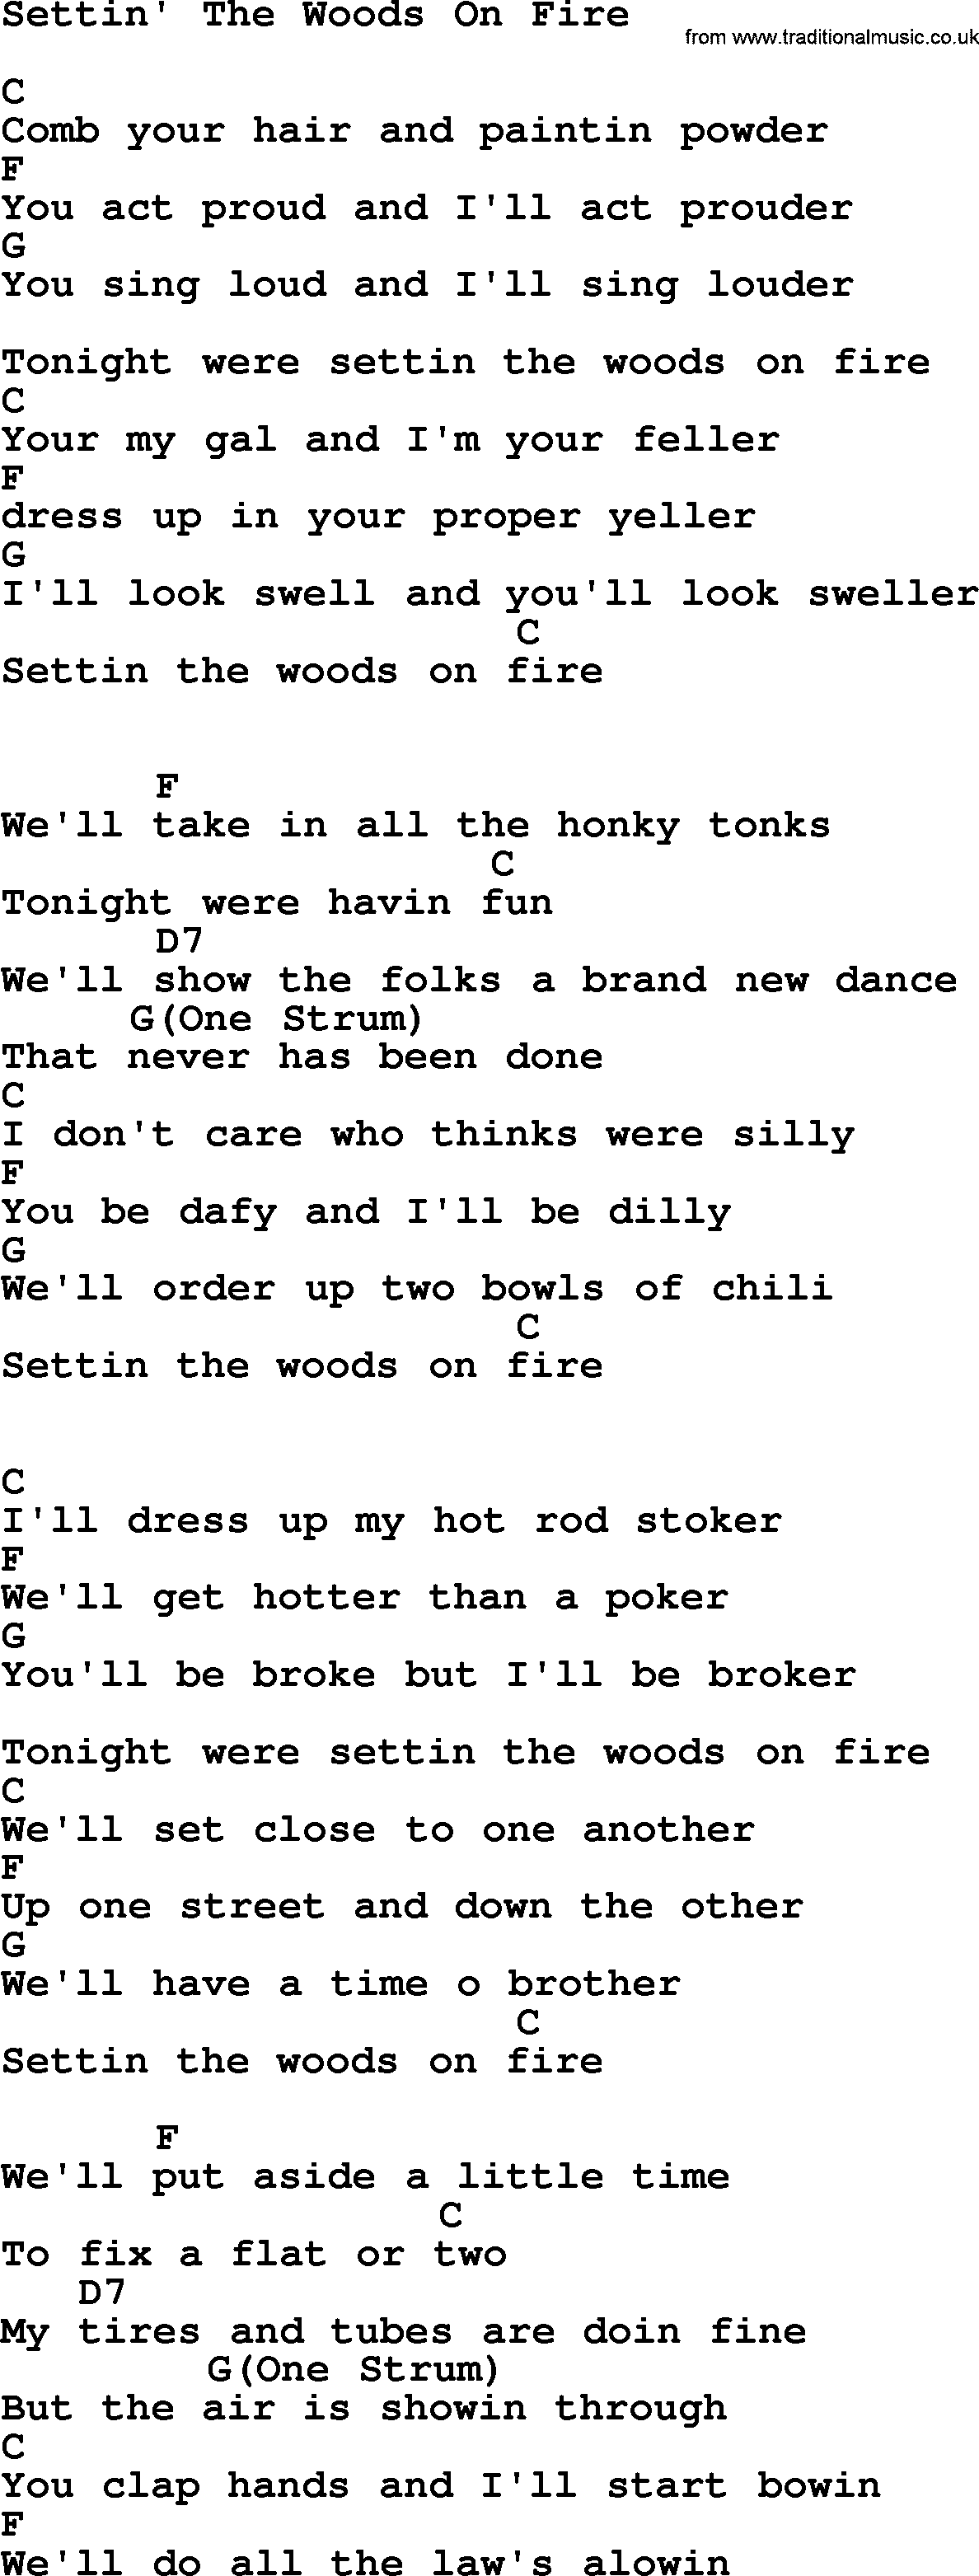 Hank Williams song Settin' The Woods On Fire, lyrics and chords